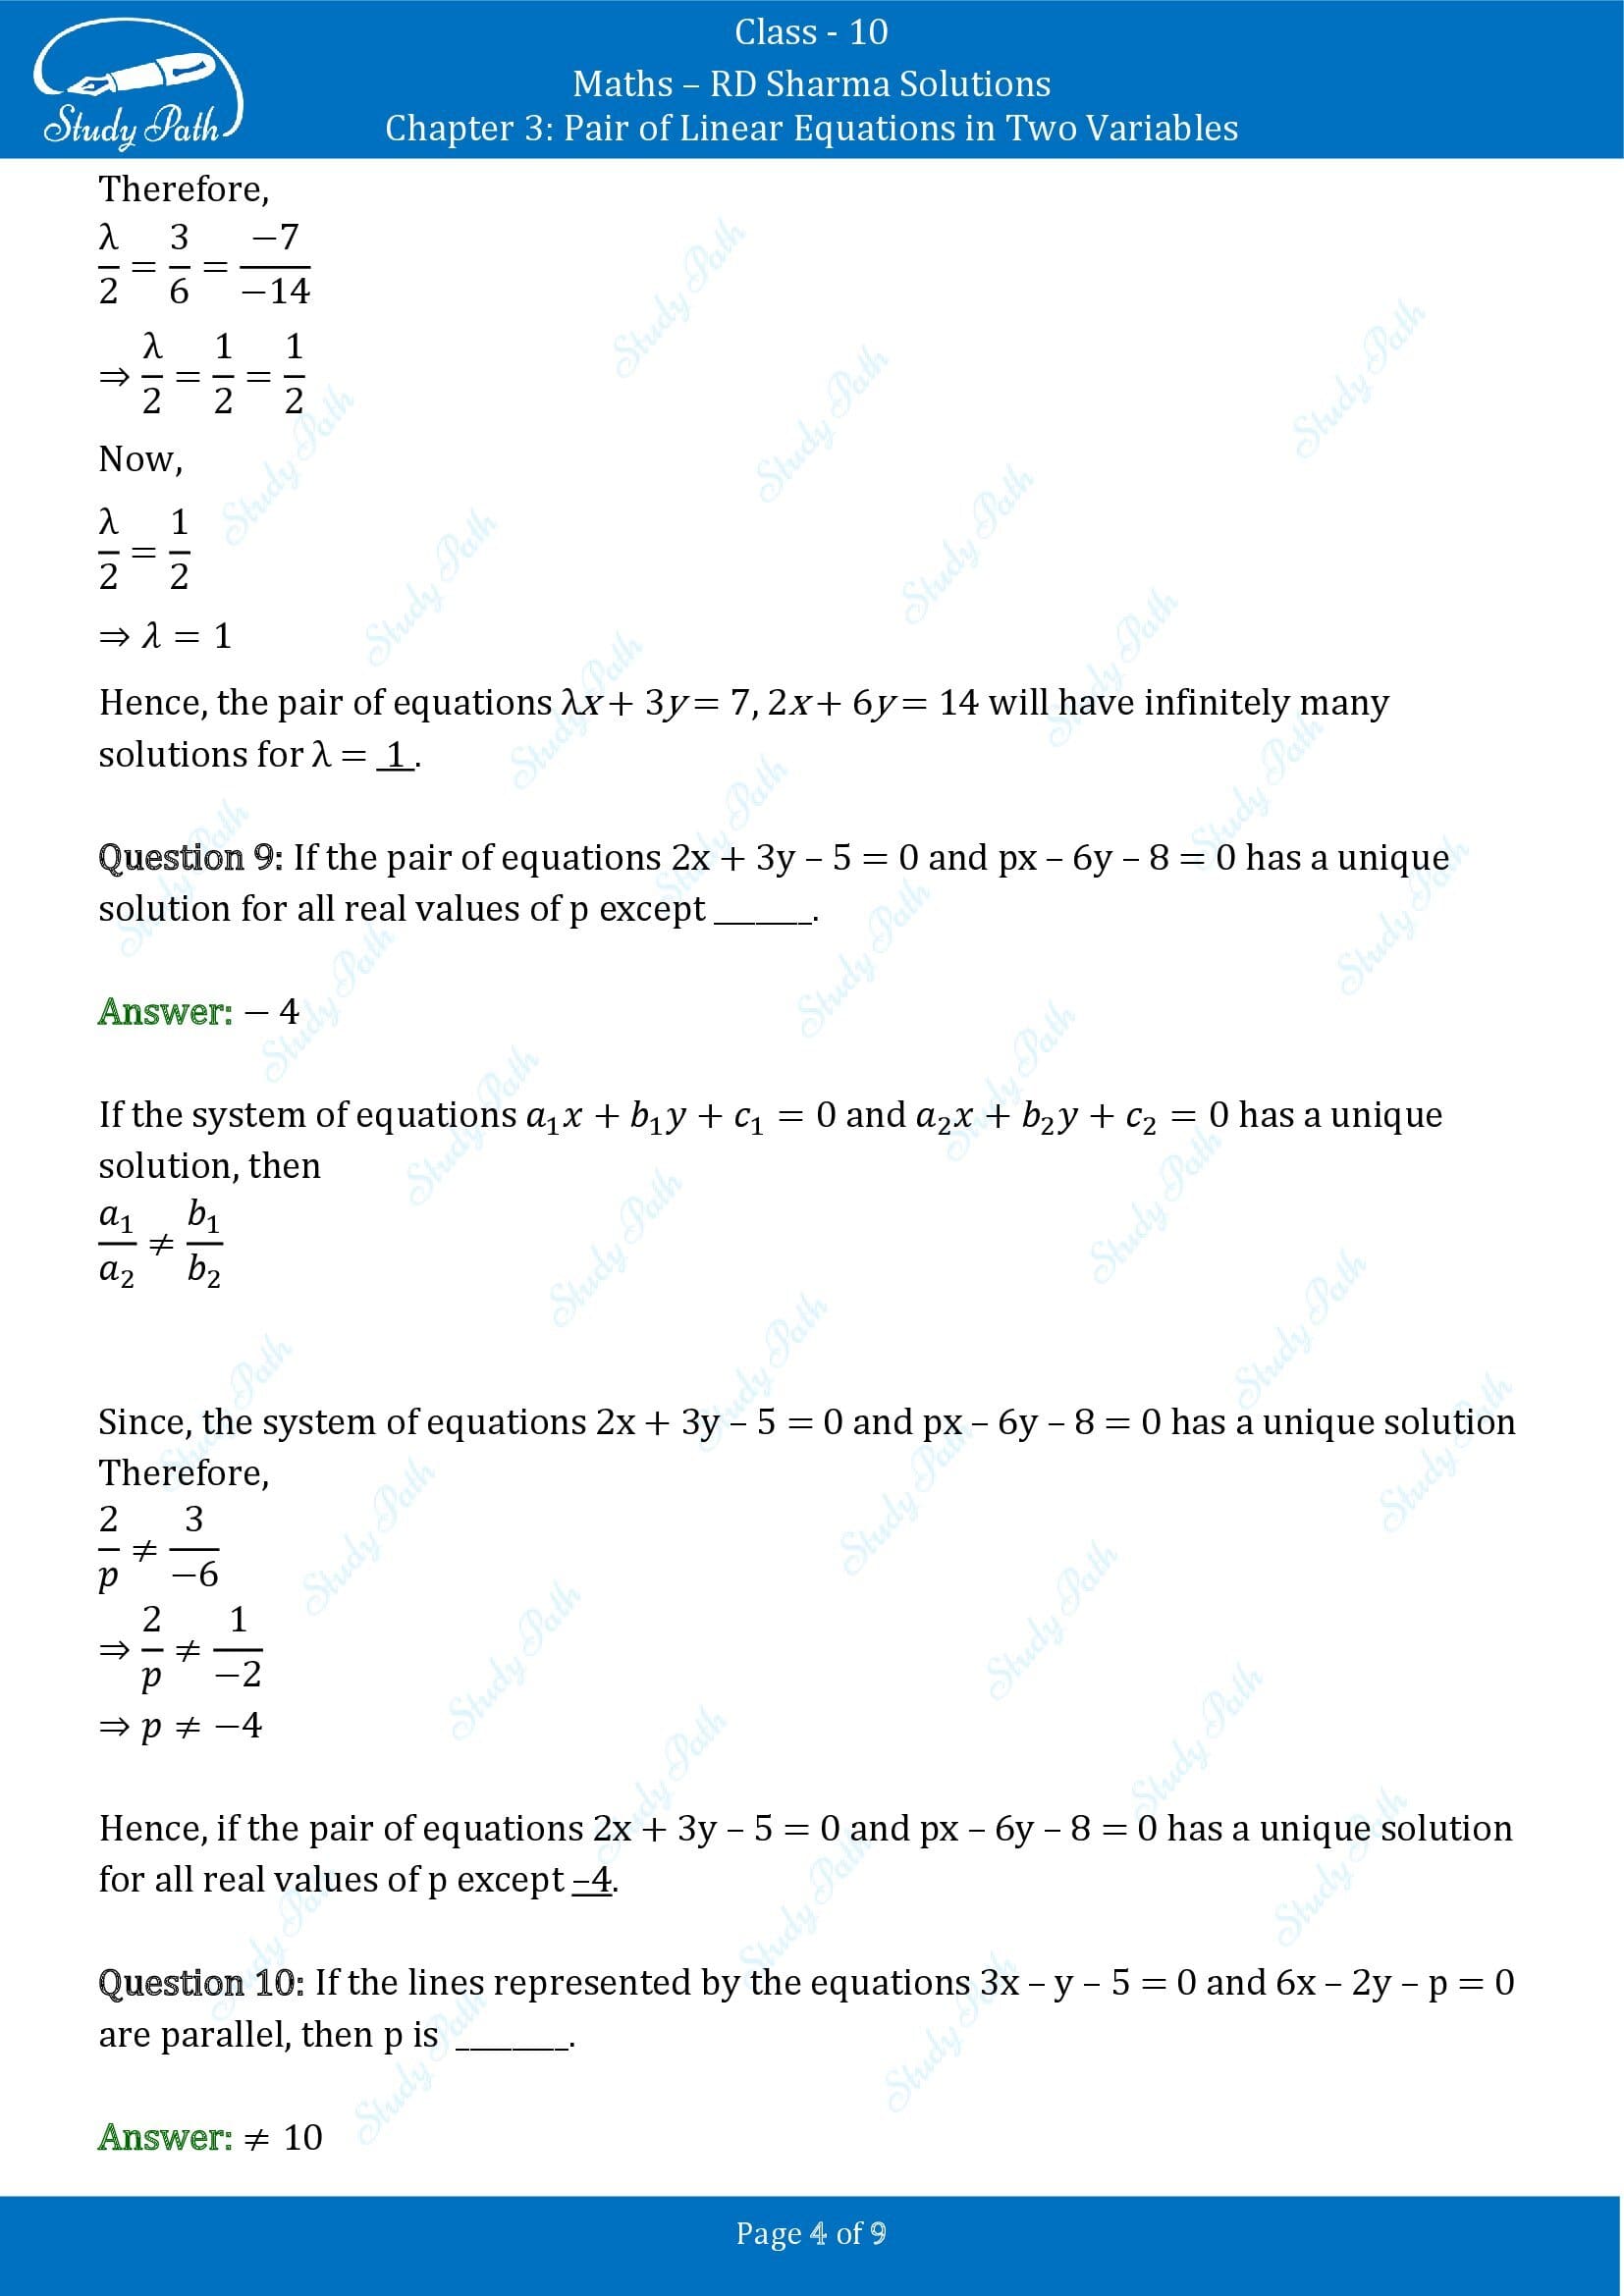 RD Sharma Solutions Class 10 Chapter 3 Pair of Linear Equations in Two Variables Exercise Fill in the Blank Type Questions FBQs 00004